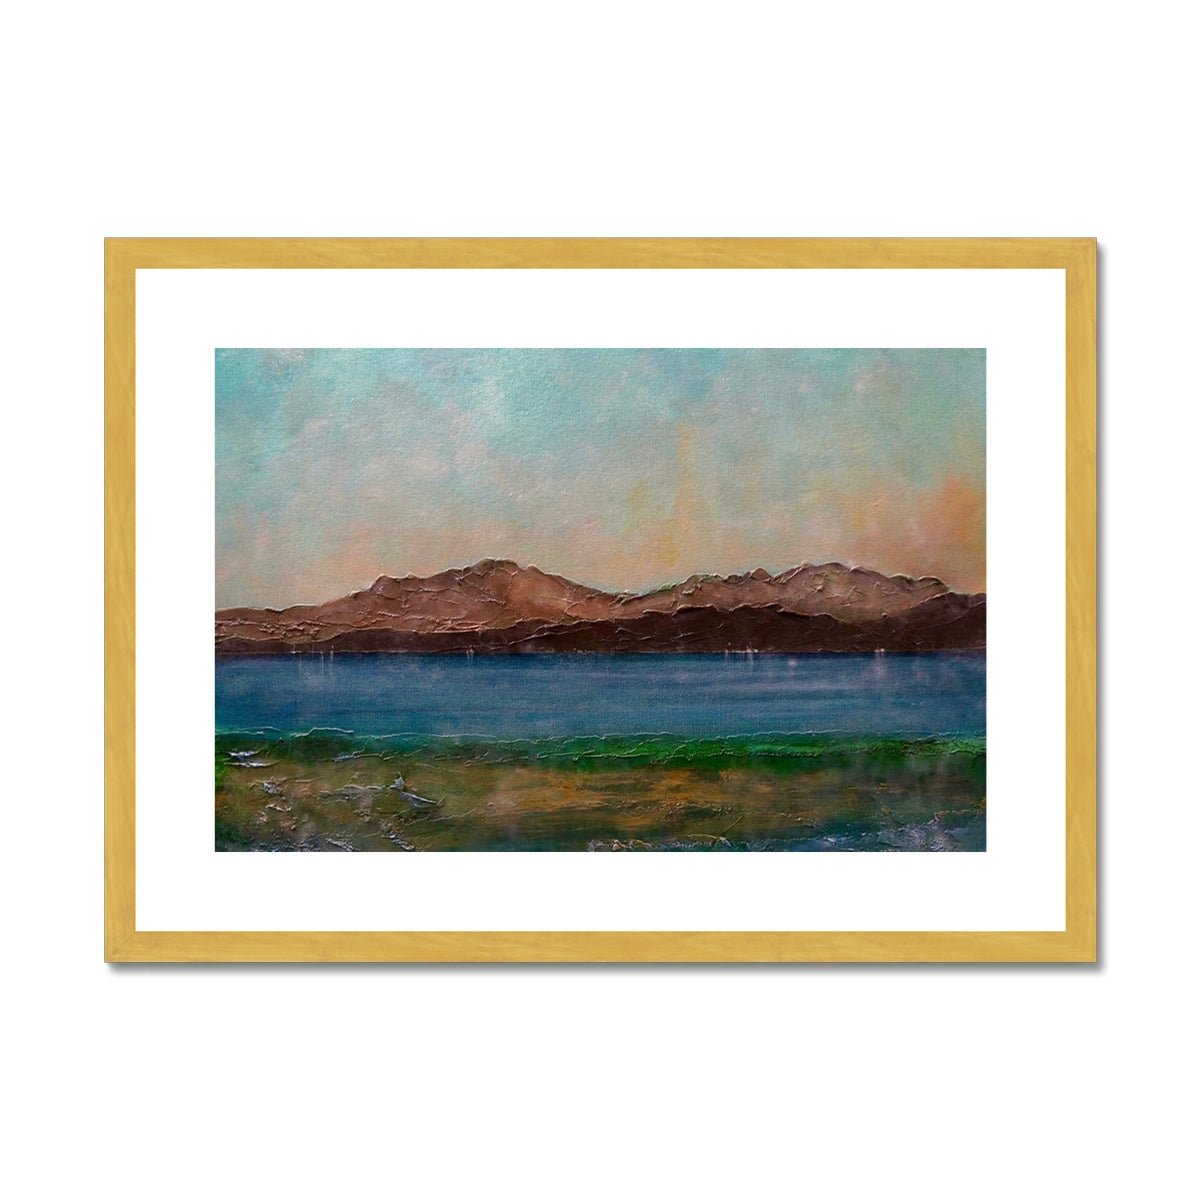 Arran From Scalpsie Bay Painting | Antique Framed & Mounted Prints From Scotland-Antique Framed & Mounted Prints-Arran Art Gallery-A2 Landscape-Gold Frame-Paintings, Prints, Homeware, Art Gifts From Scotland By Scottish Artist Kevin Hunter